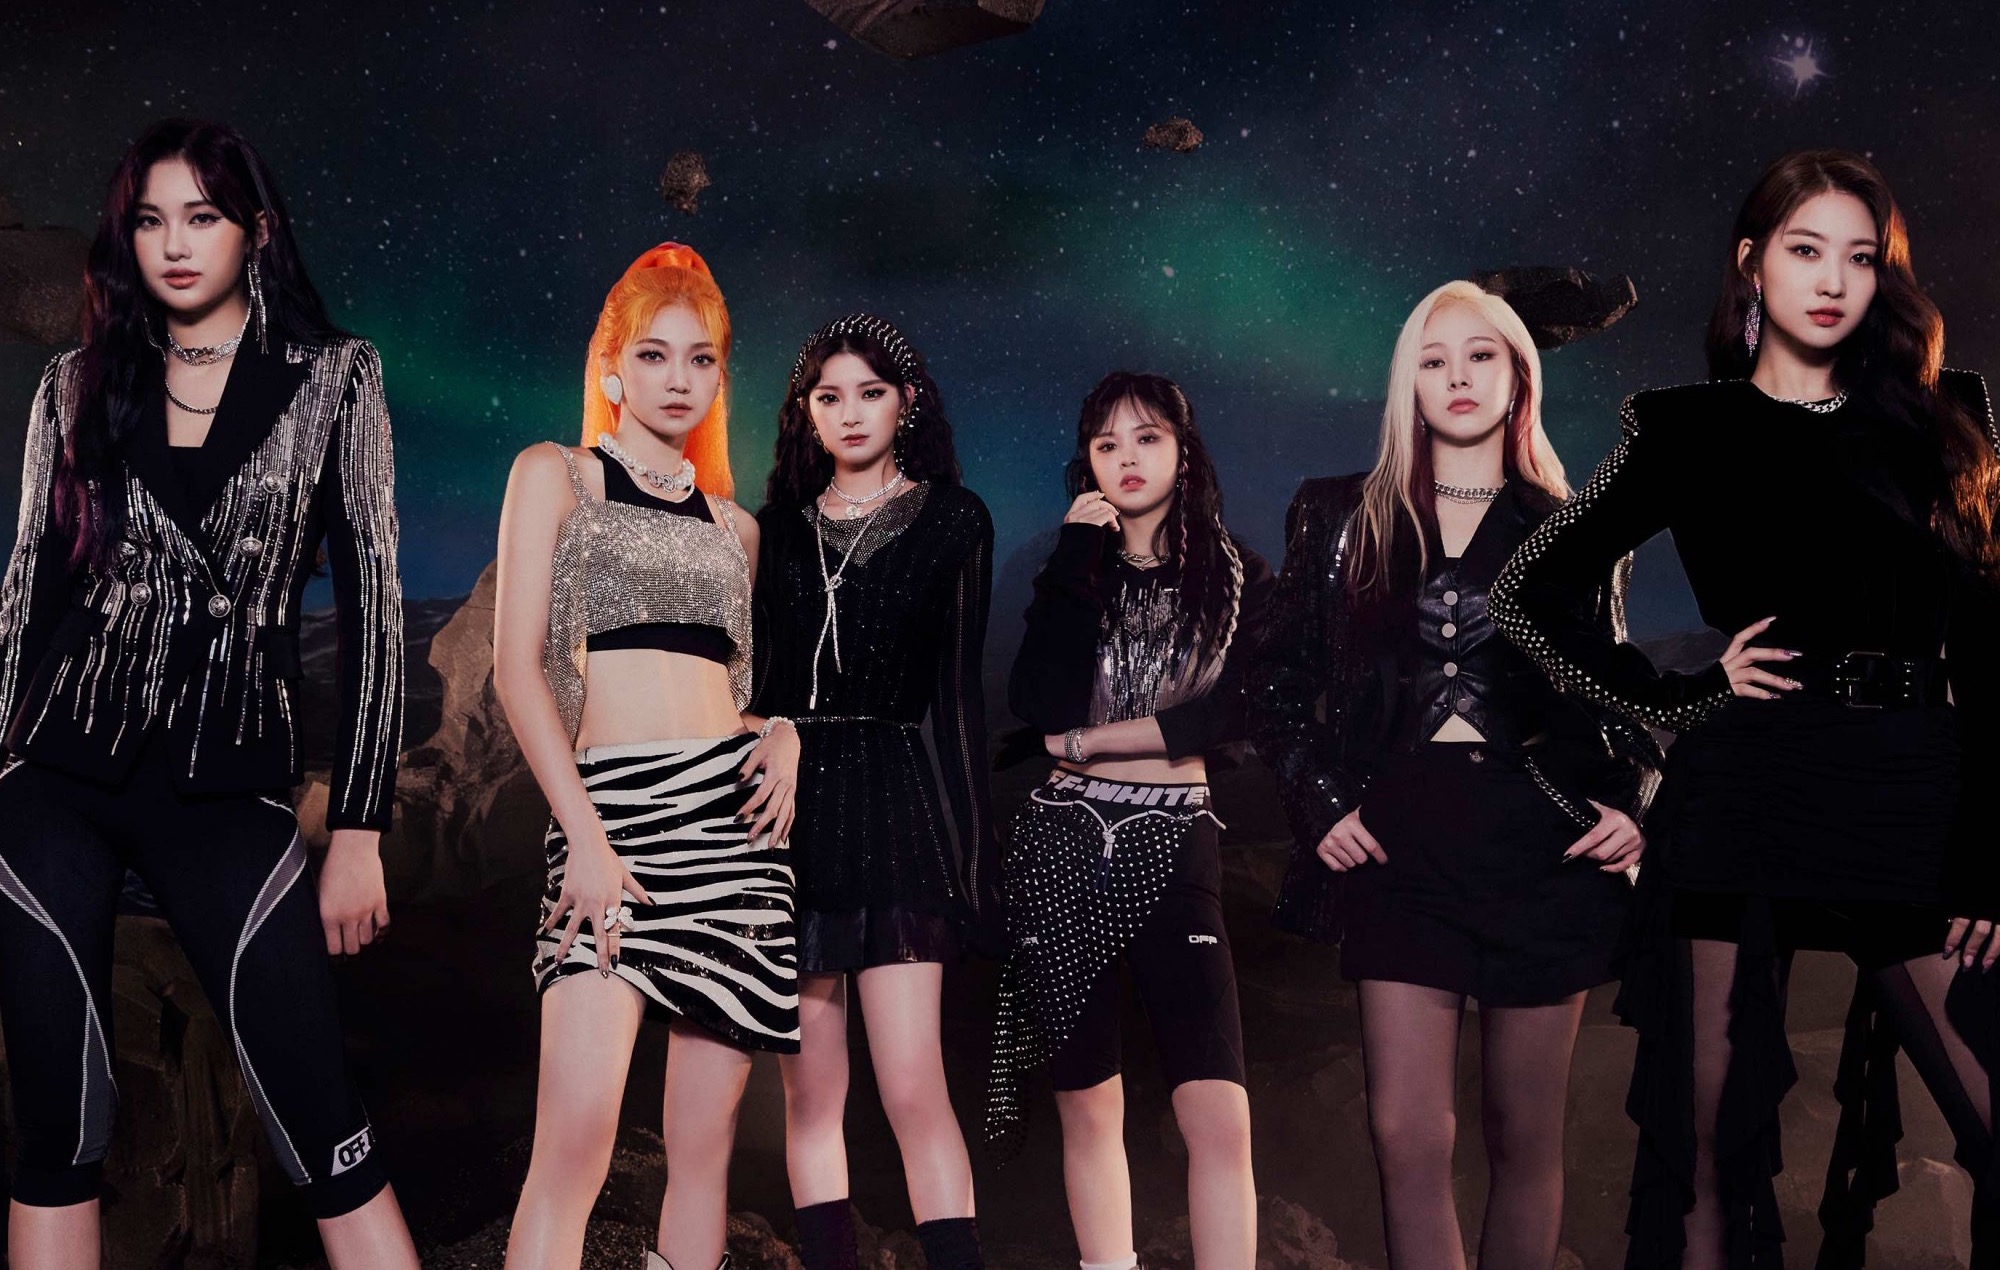 EVERGLOW return with powerful music video for 'Pirate'